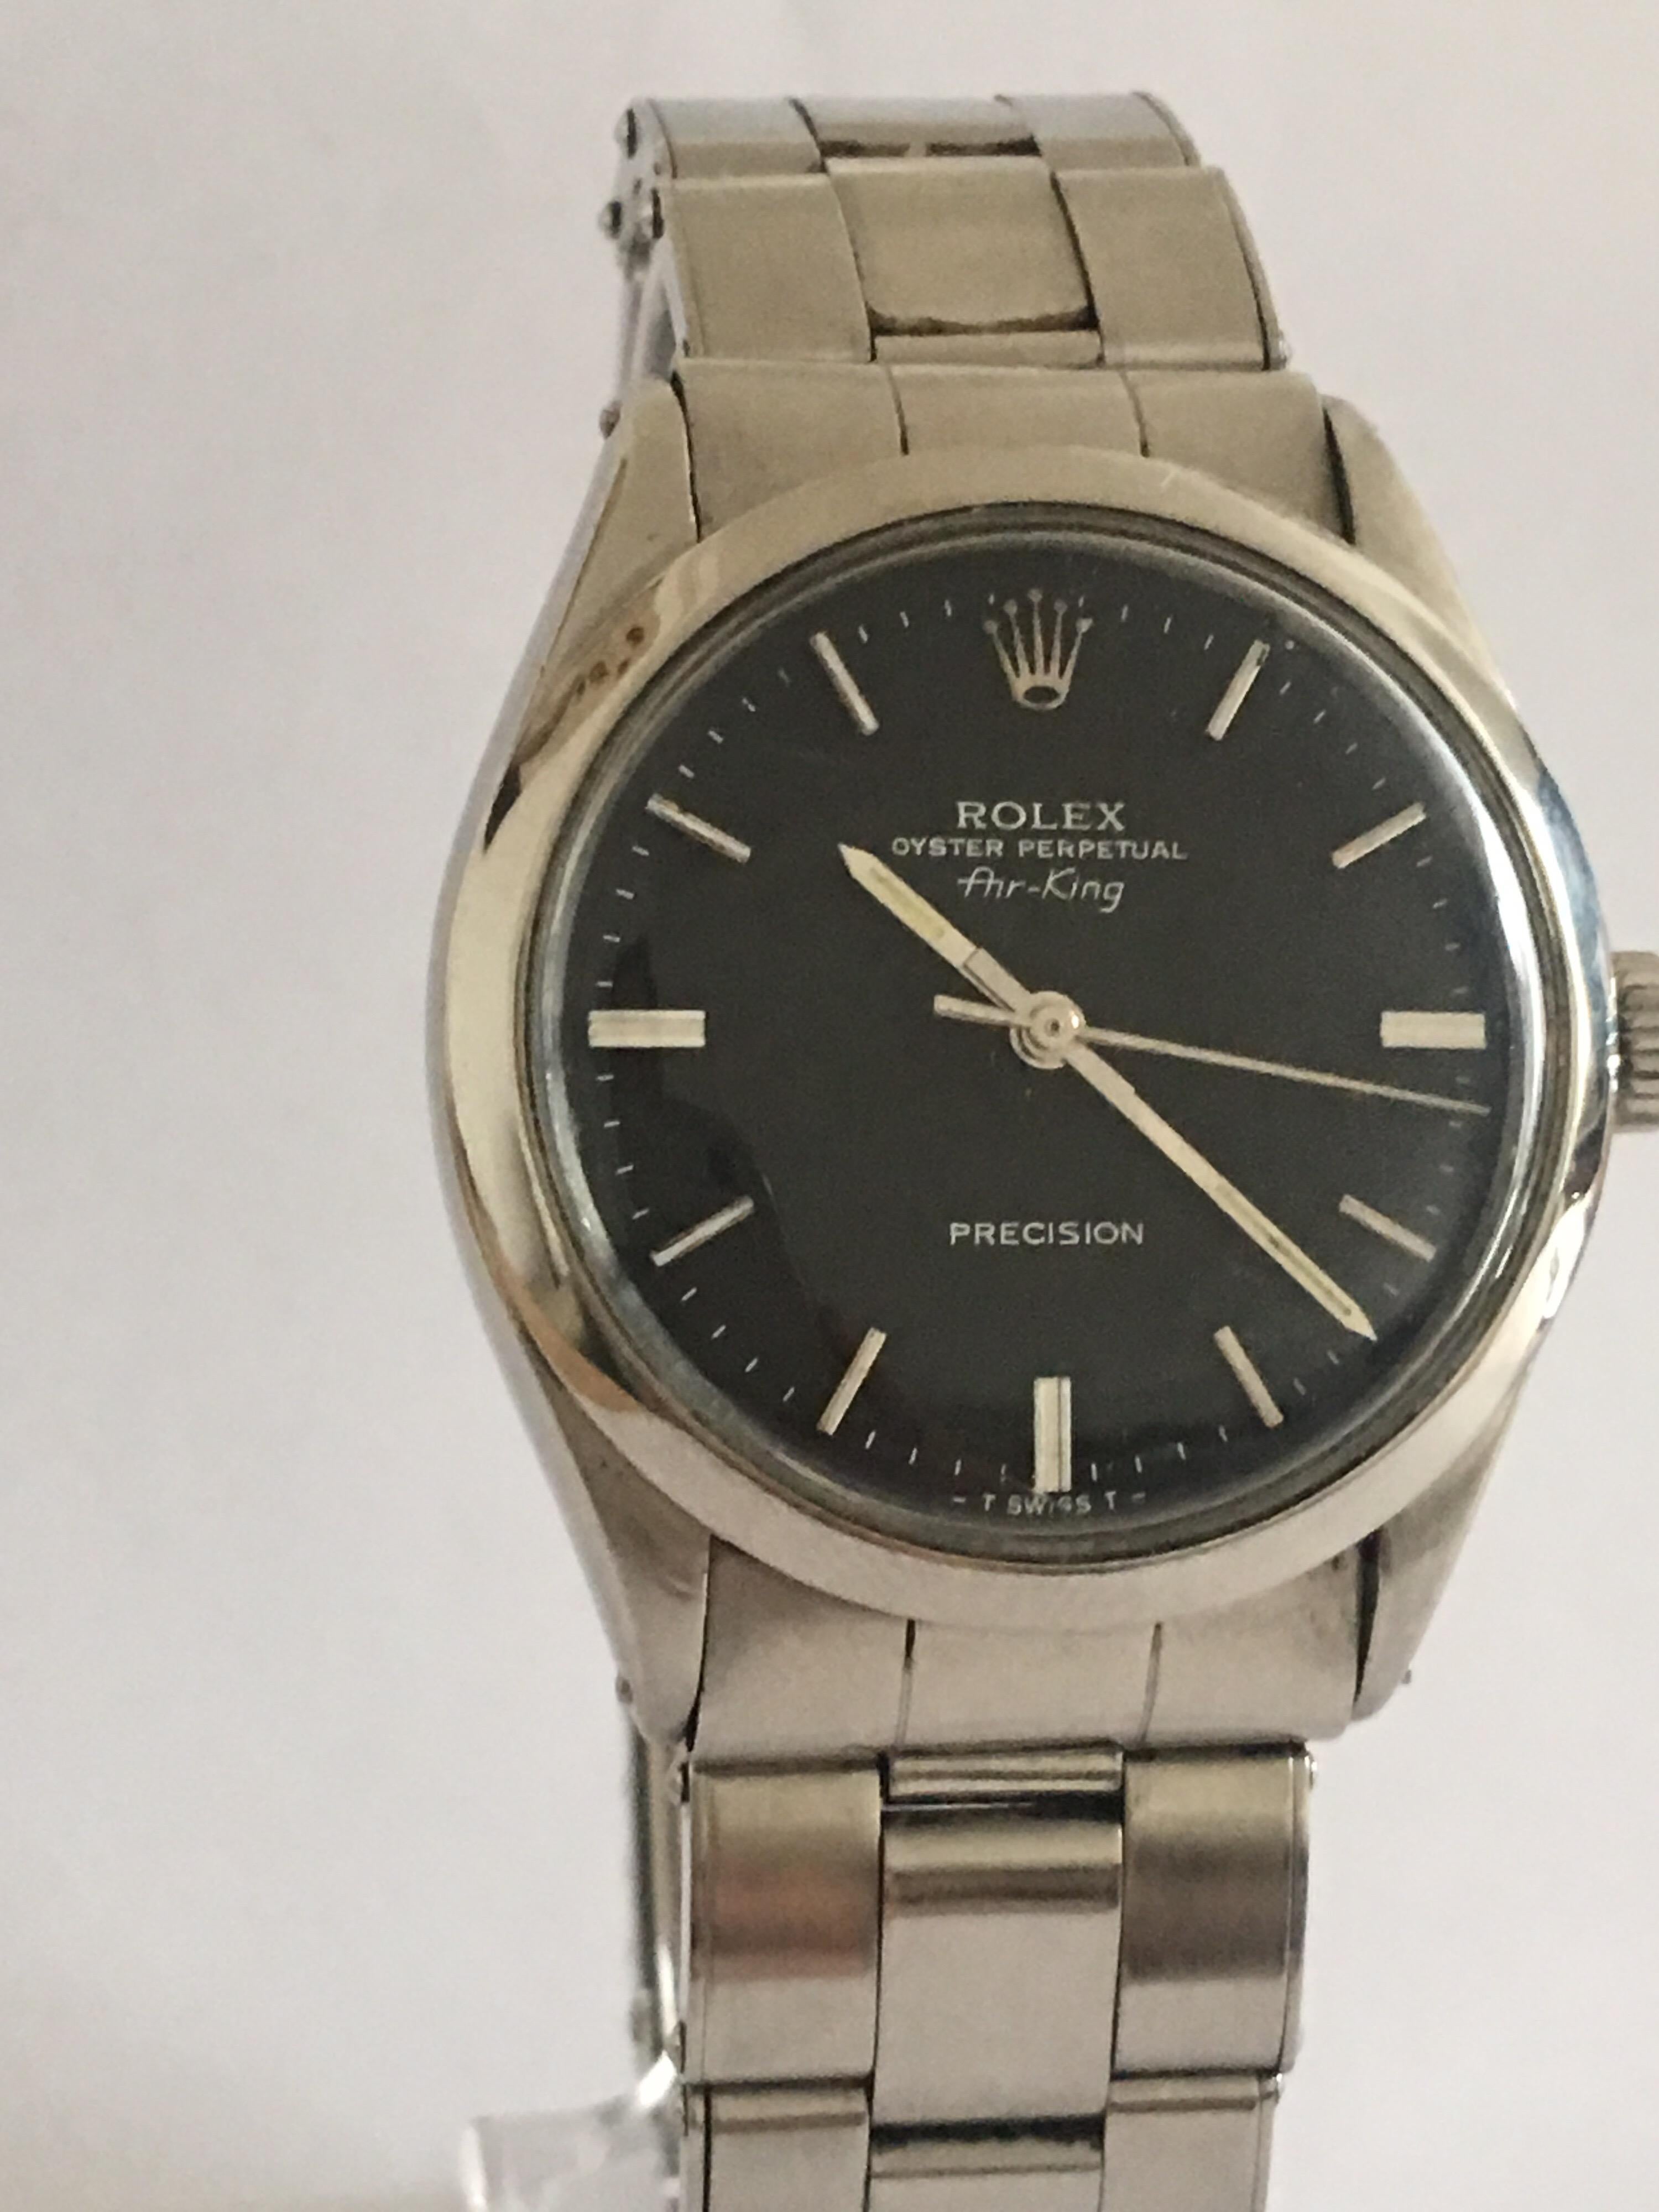 Vintage 1960s Rolex Oyster Perpetual Air-King Precision, 1520 For Sale 9